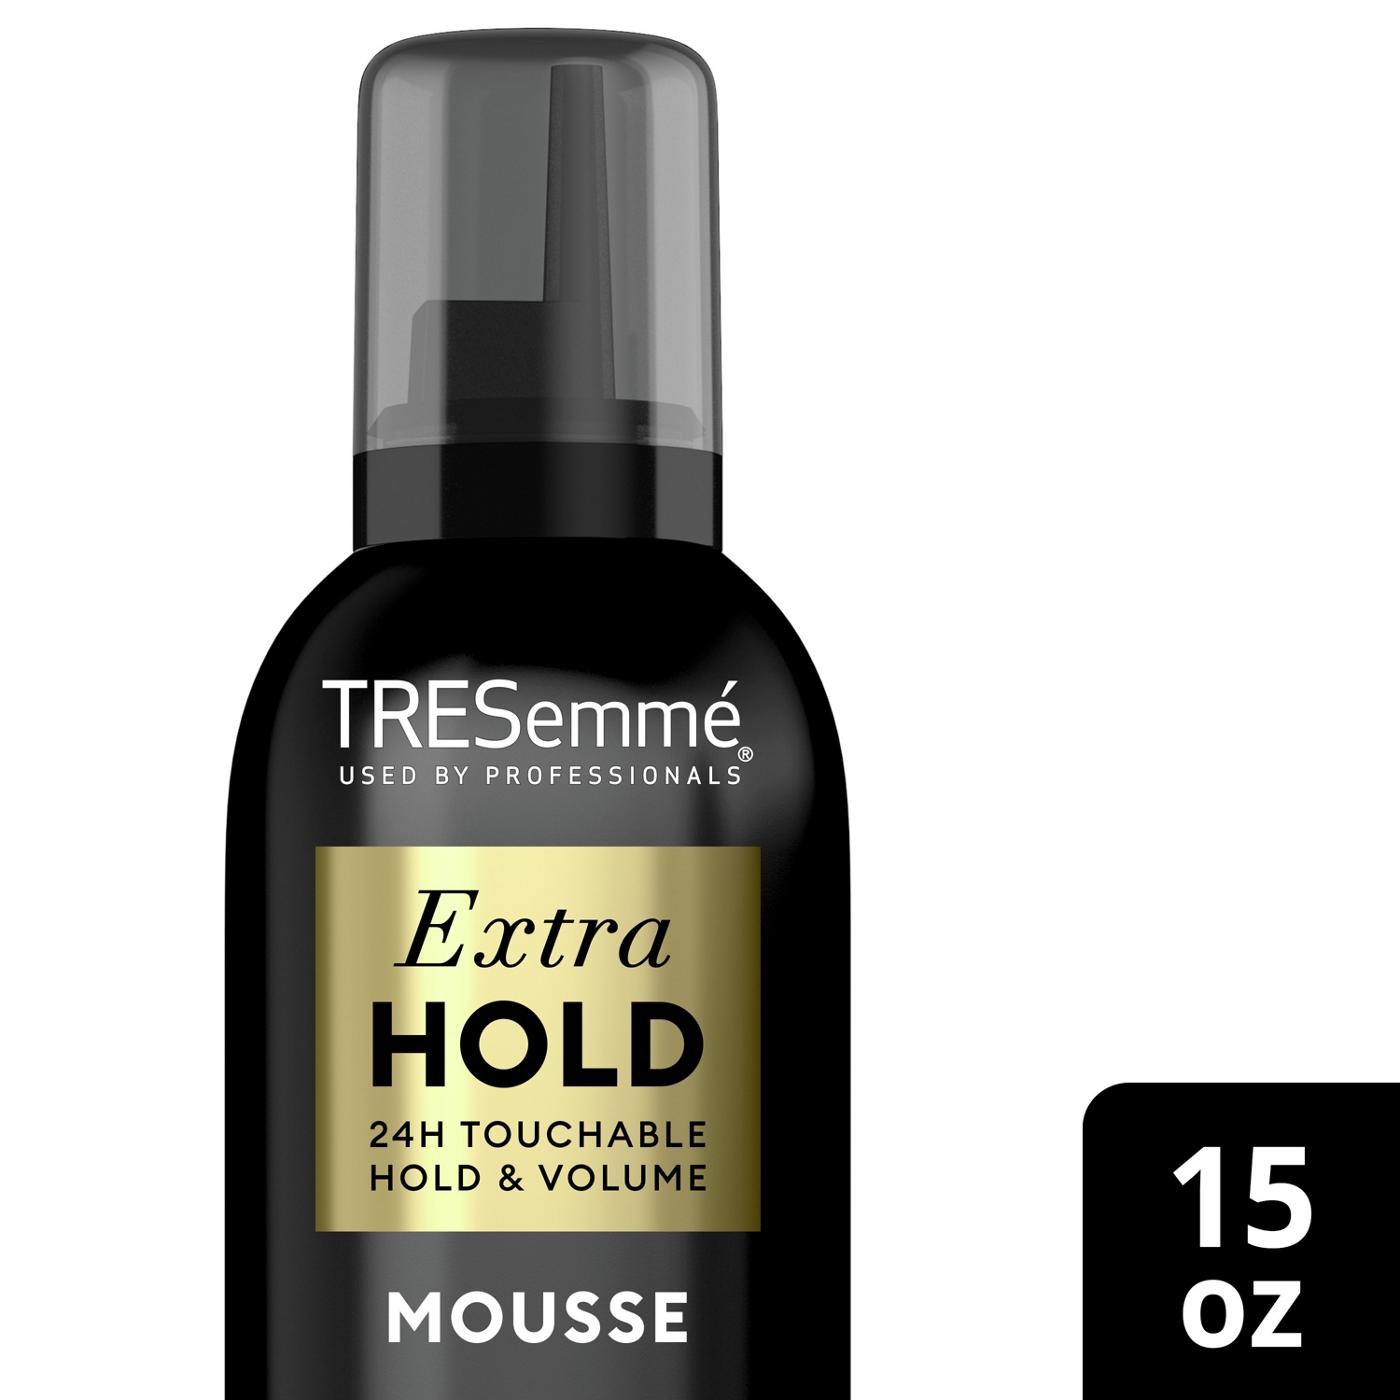 TRESemmé TRESemmé Extra Hold Volumizing Mousse is a professional-quality clean-feel mousse that volumizes and holds style. This hair mousse is powered by Pro Lock Tech™ for 24H frizz control and style memory. Our styling mousse contains holding polymers to expertly iron out stray hairs for controlled flexible styles, not flat and always beautifully full. Step 1: Start by prepping your hair with your favorite TRESemmé shampoo and conditioner. Step 2: Towel-dry hair, shake the can and dispense 2-3 egg-sized dollops of TRESemmé Extra Hold Mousse. Step 3: Apply the Extra Hold hair mousse to hair directly with a brush or with your hands, then brush from roots to ends to cover thoroughly. Step 4: Blow dry your hair and finish with TRESemmé Hair Spray. TRESemmé is an industry leader in providing you with salon-ready hair quality products. Our unique formulas in this frizz-control mousse are the results of years of scientific research. Every ingredient is carefully selected to ensure your hair receives the best possible care. Our TRESemmé policy also prohibits animal testing for our hair products and the ingredients used in them anywhere in the world.; image 4 of 4